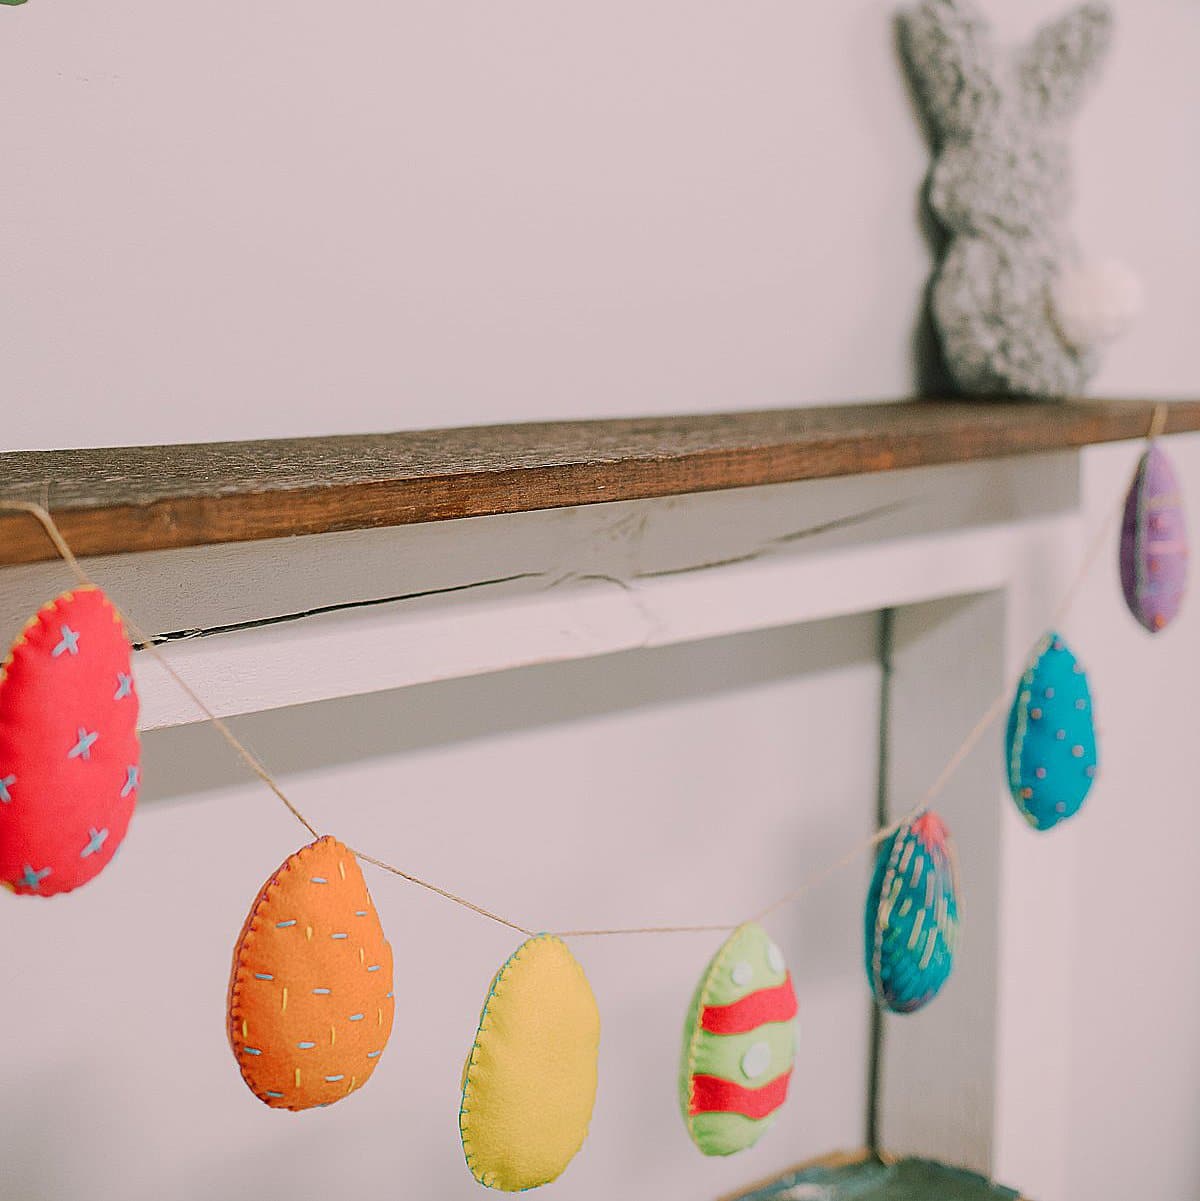 Easter garland made with felt egg shapes in varying colors hanging from wood mantel.